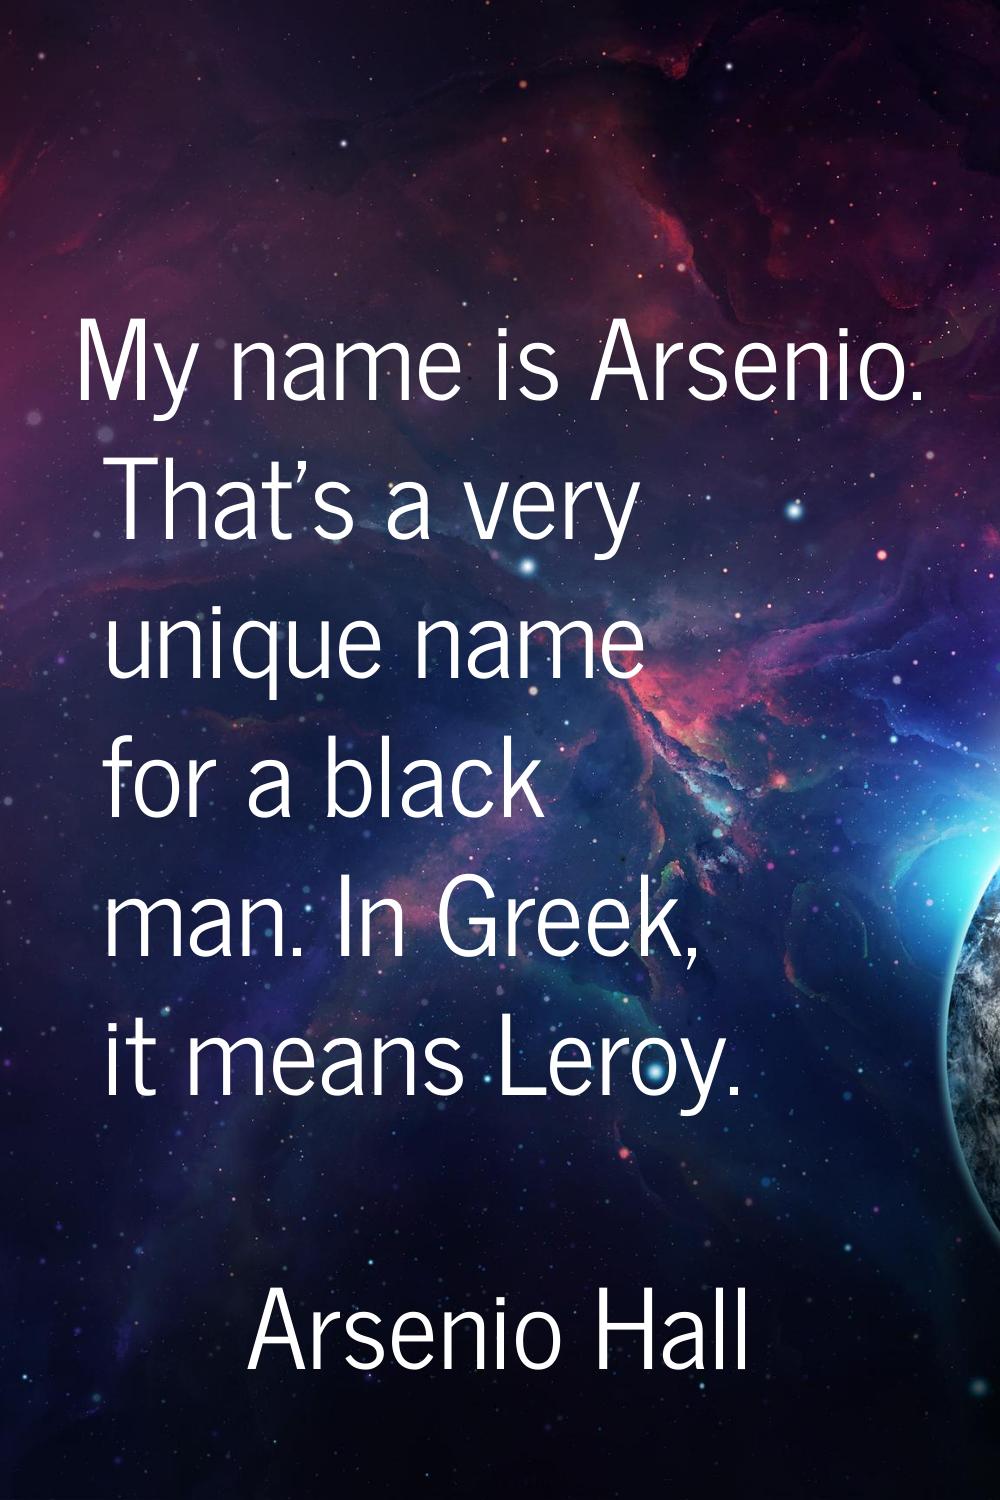 My name is Arsenio. That's a very unique name for a black man. In Greek, it means Leroy.